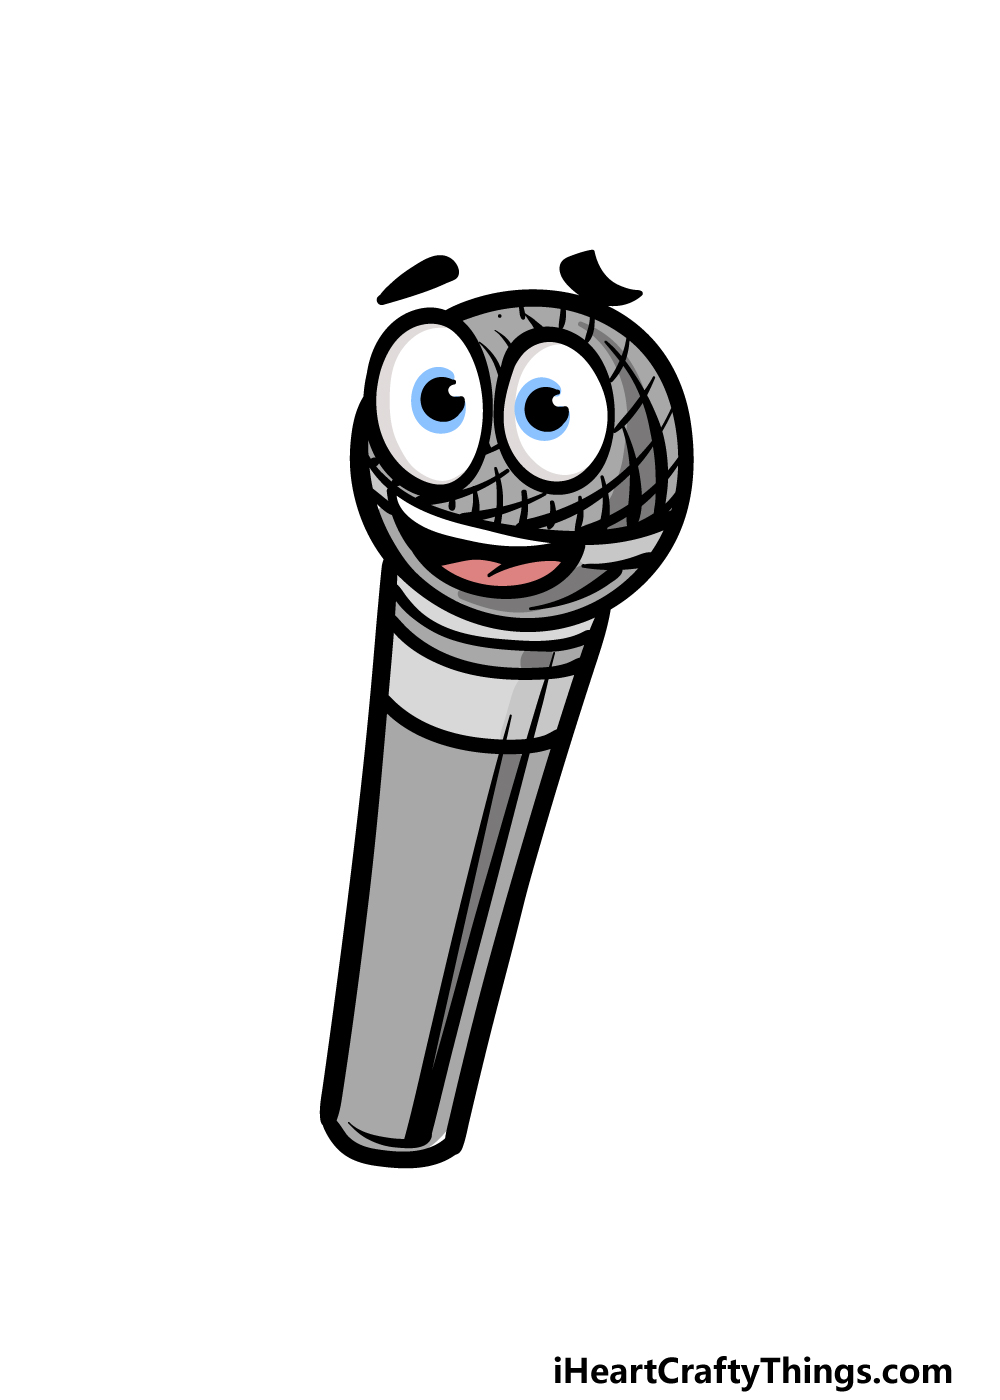 Cartoon Microphone Drawing - How To Draw A Cartoon Microphone Step By Step